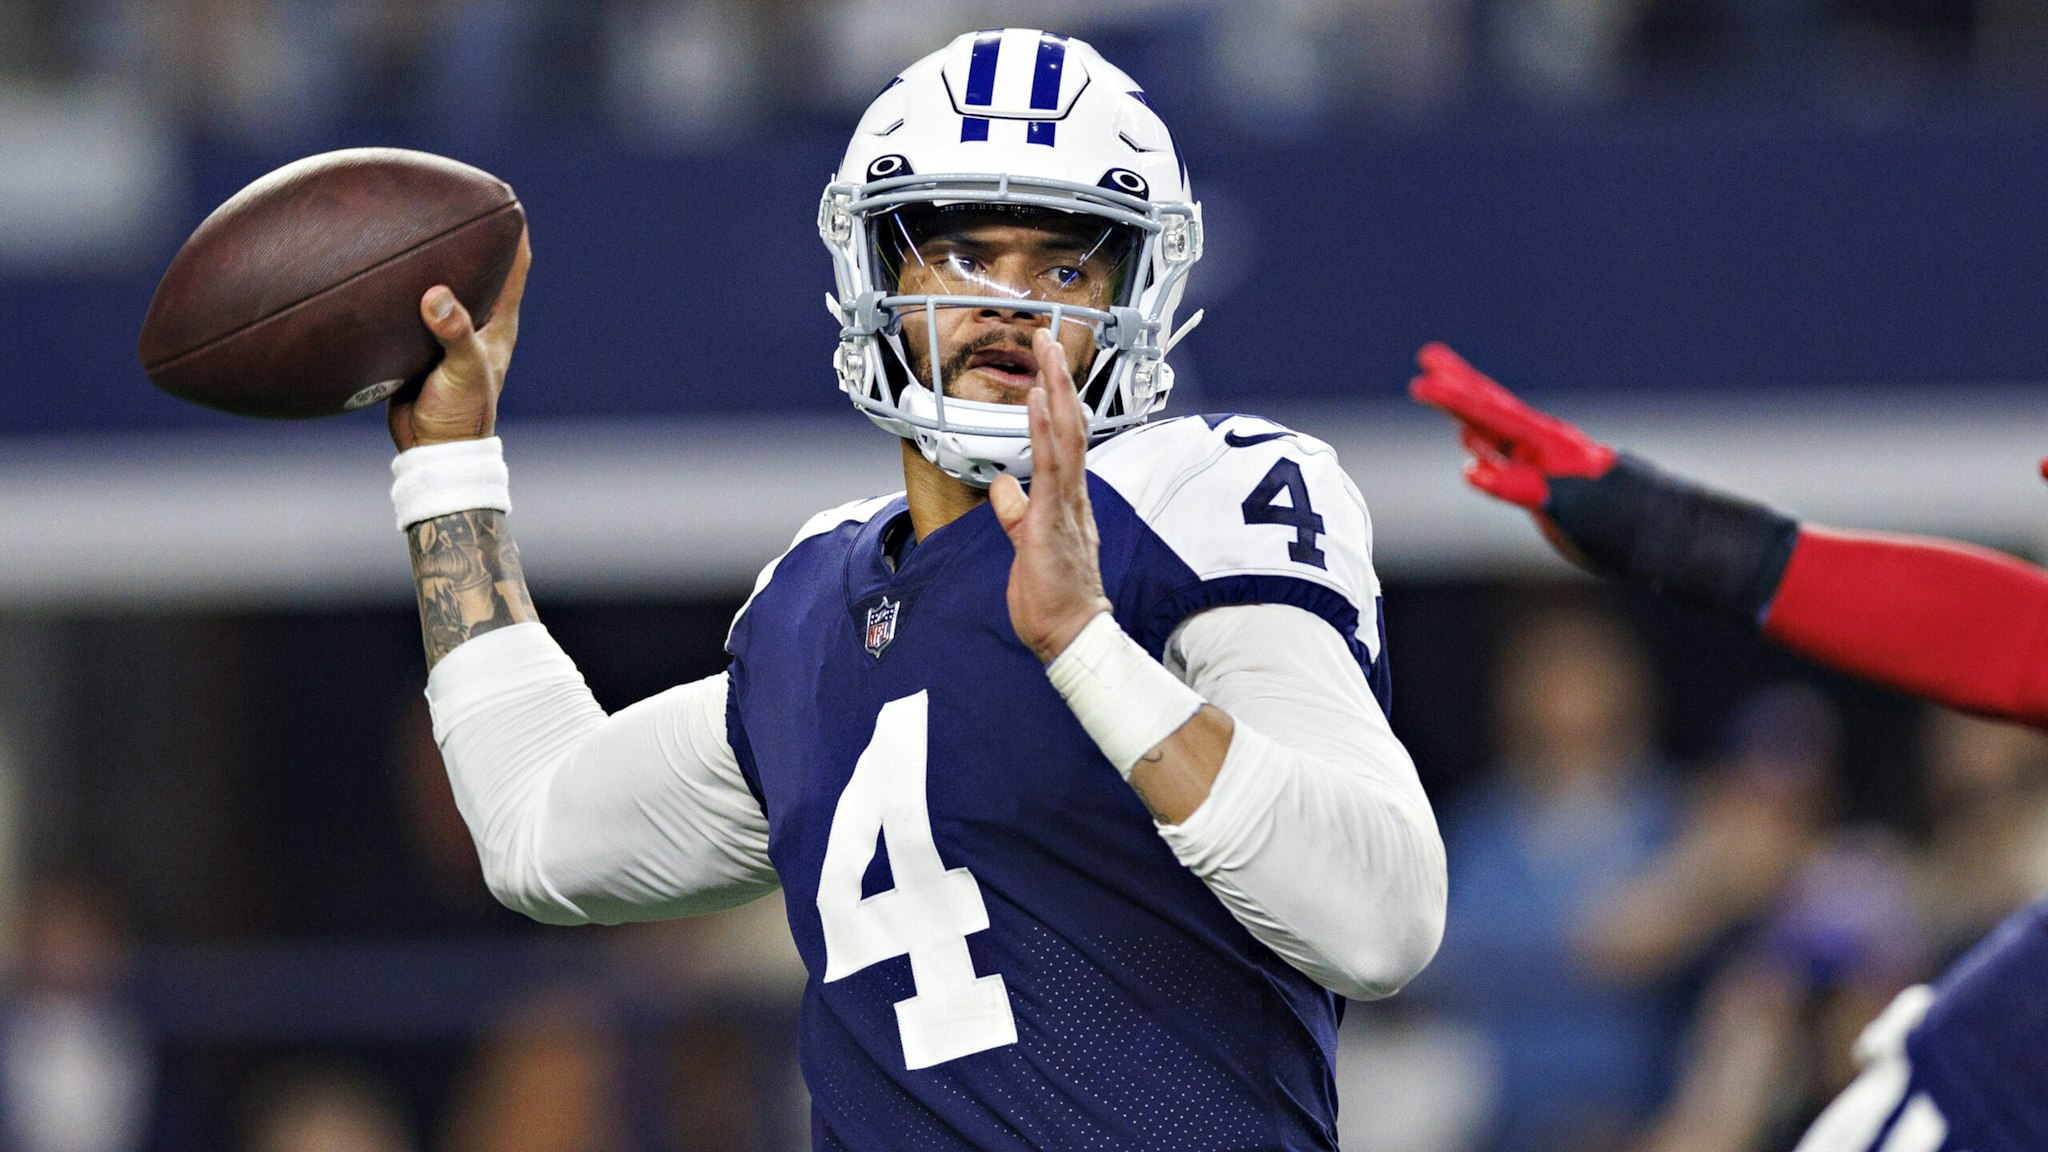 ARLINGTON, TEXAS - NOVEMBER 24: Dak Prescott #4 of the Dallas Cowboys throws a pass during a game against the New York Giants at AT&amp;T Stadium on November 24, 2022 in Arlington, Texas. The Cowboys defeated the Giants 28-20.